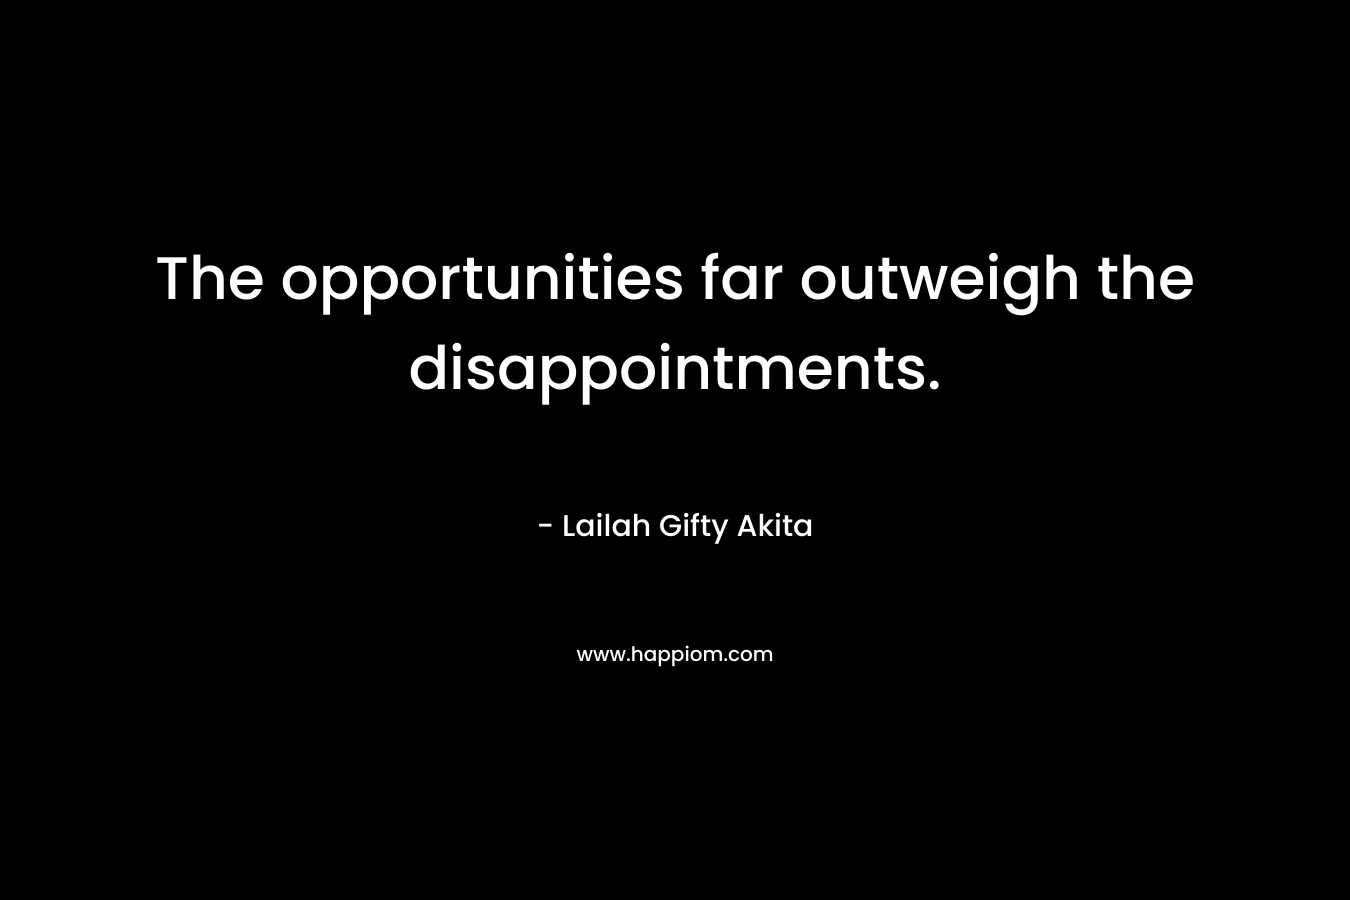 The opportunities far outweigh the disappointments.